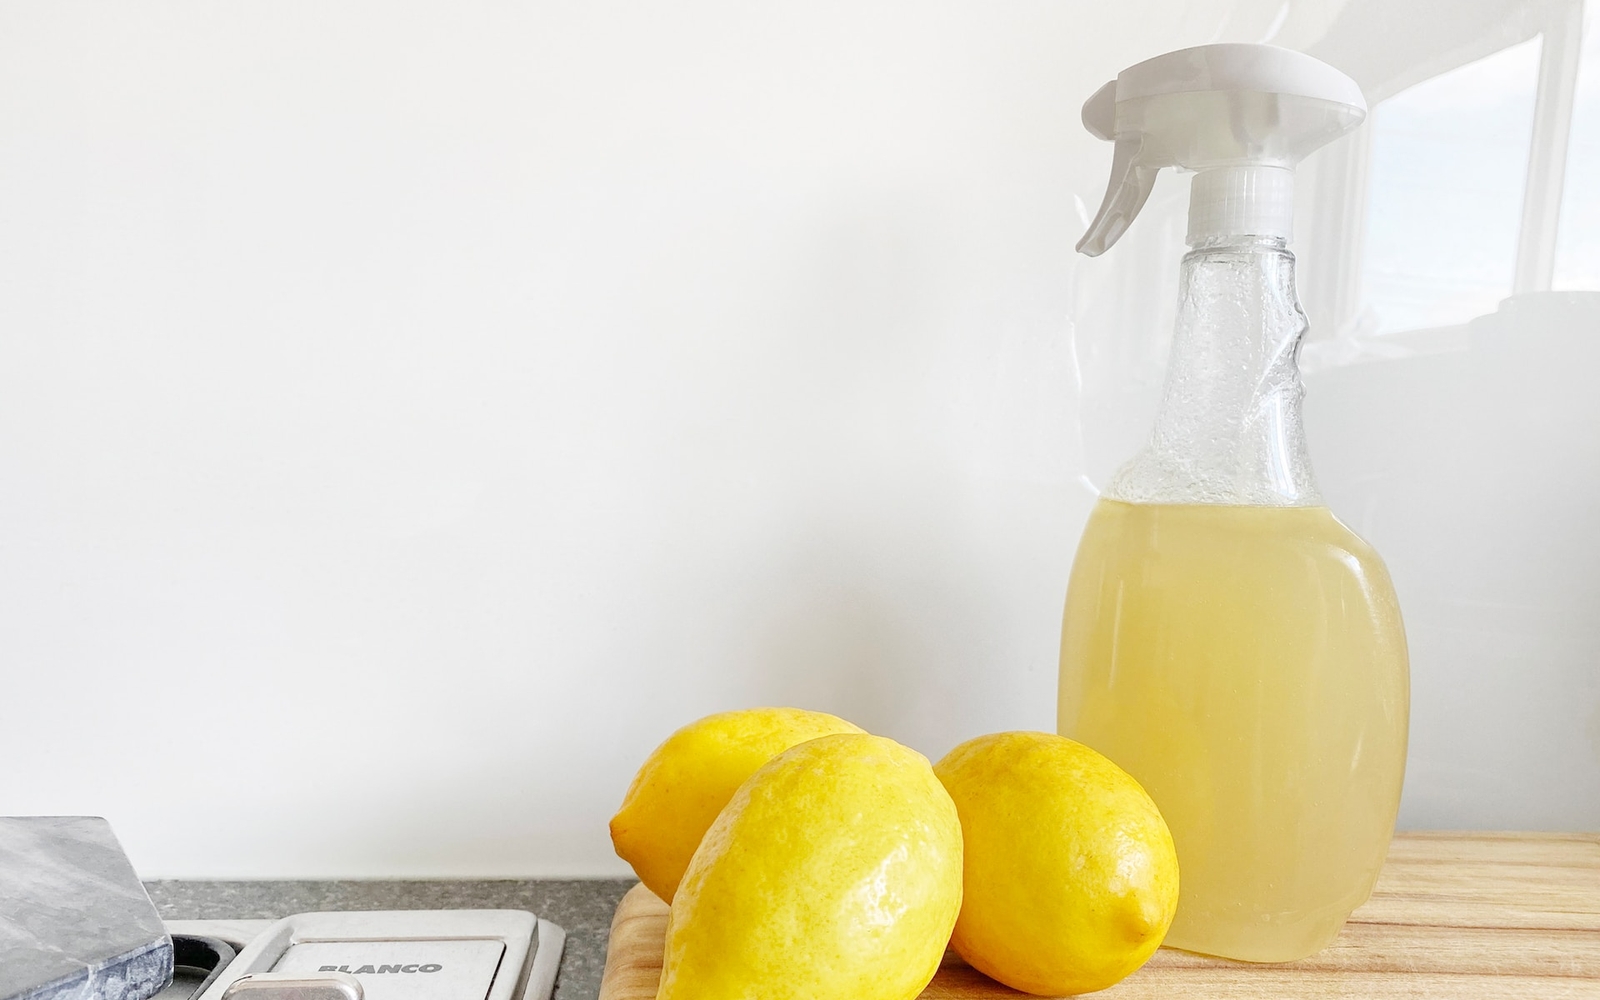 A homemade cleaning solution in a clear spray bottle next to two whole lemons on a wooden kitchen counter.